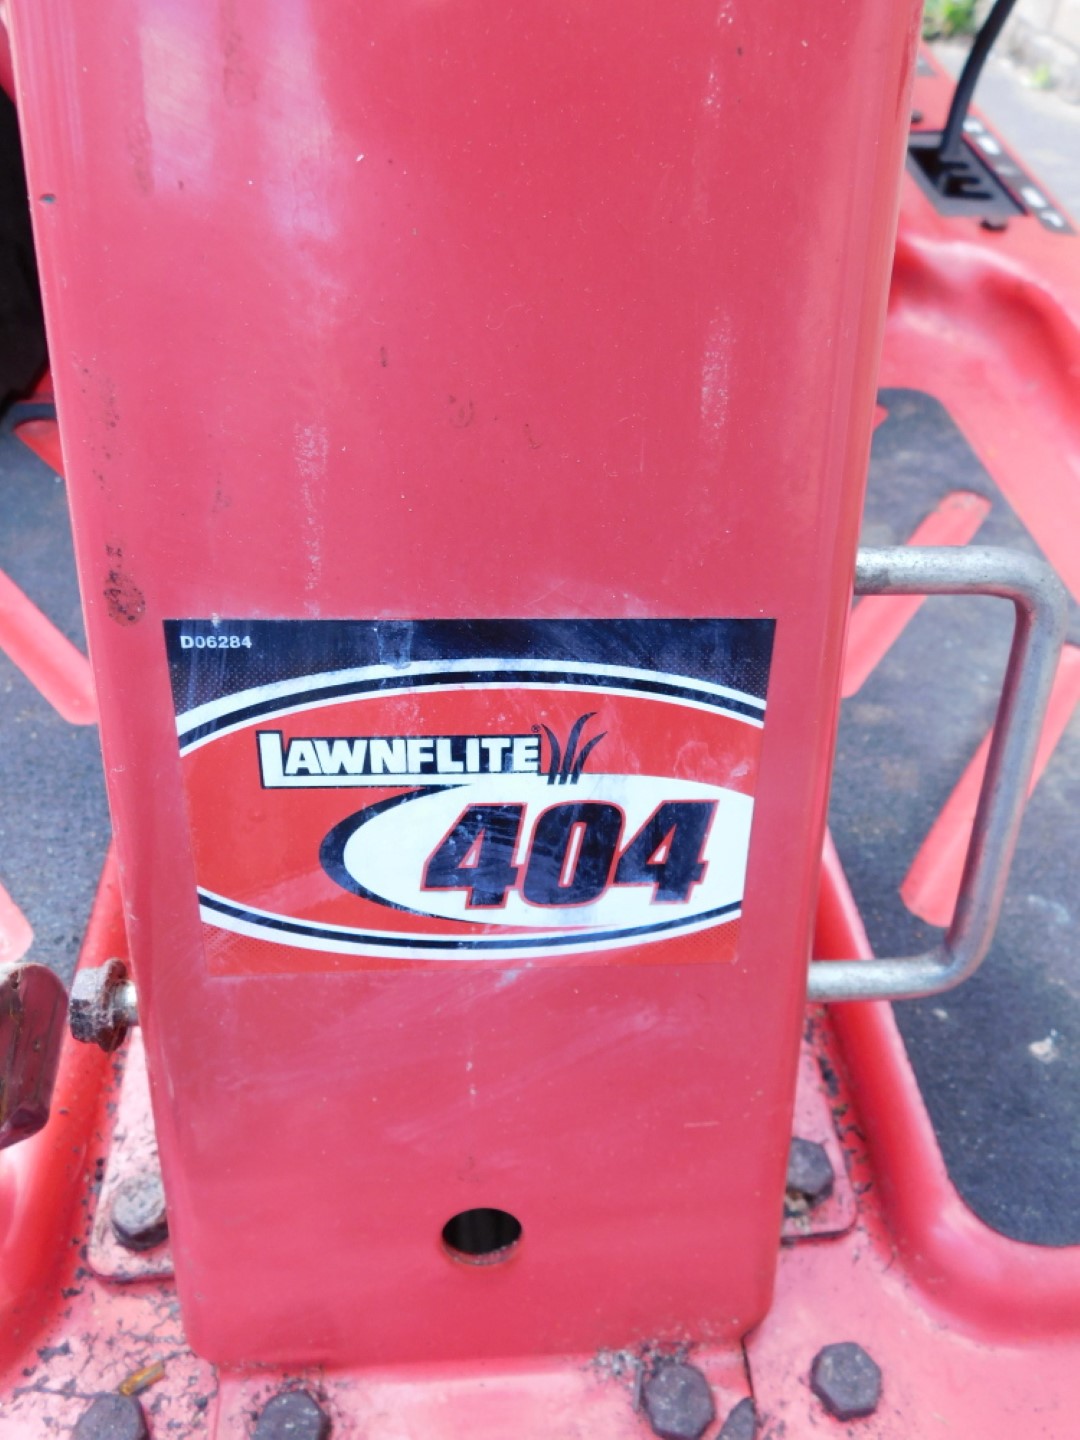 A Lawnflite 404 petrol ride on mower, in red. - Image 3 of 5